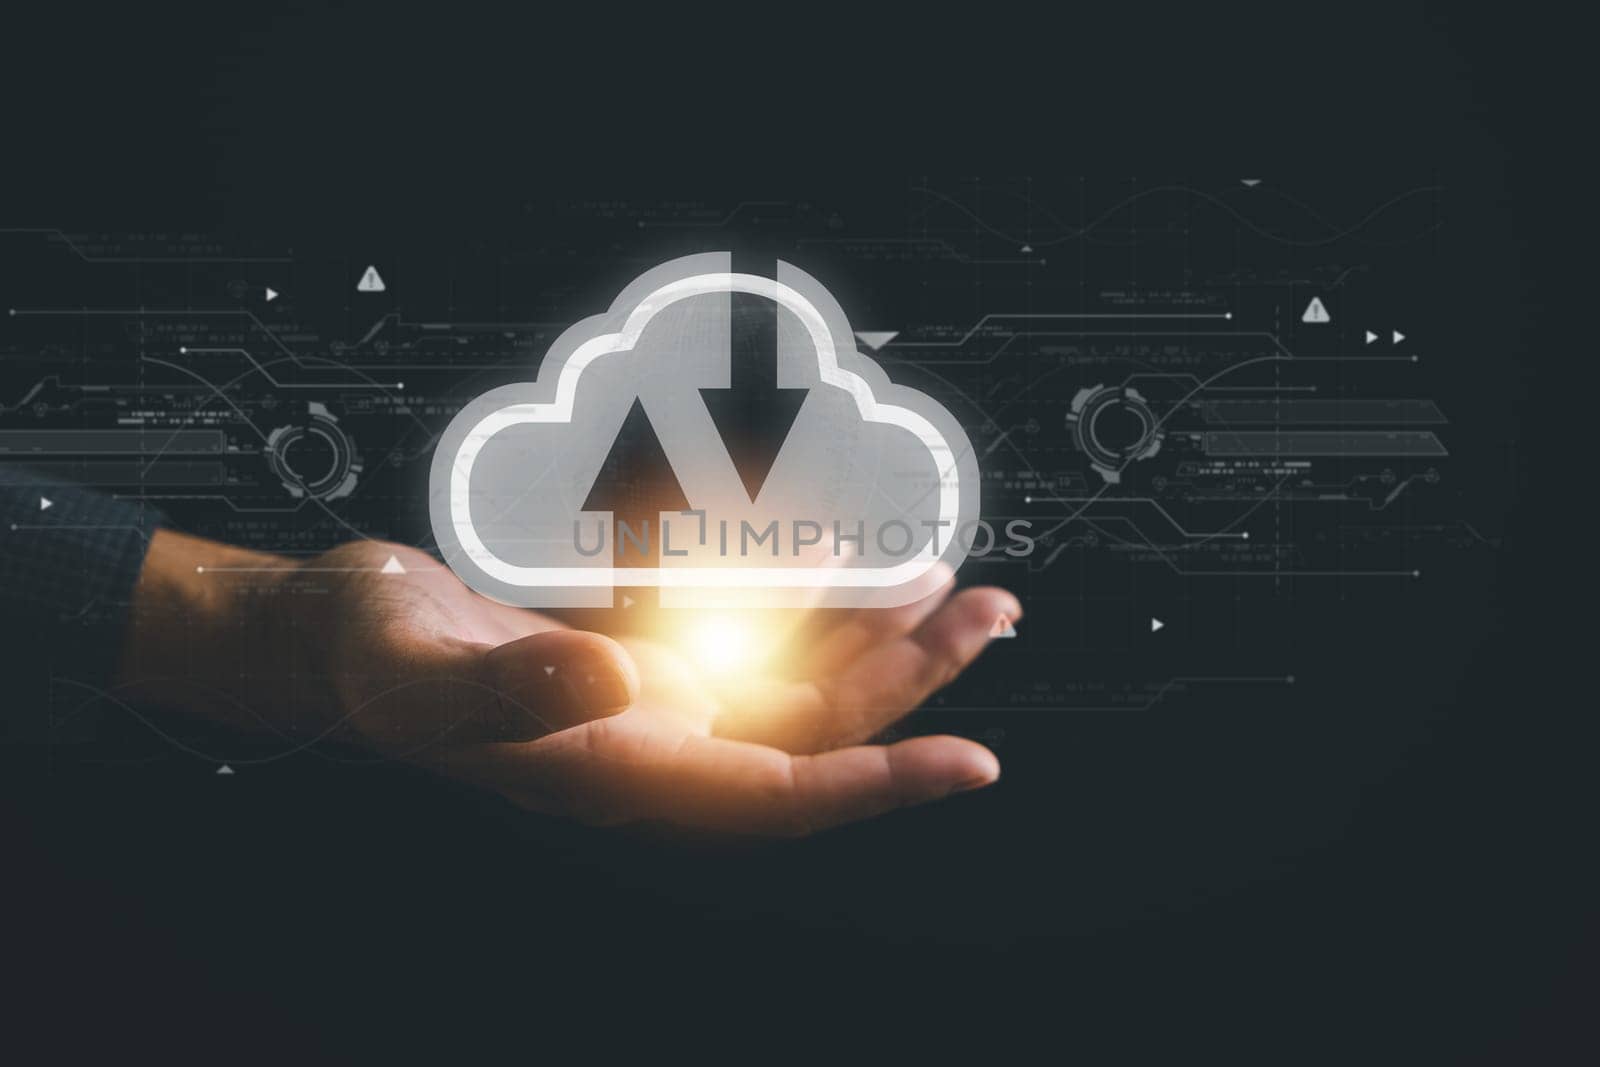 With a firm grasp on the cloud computing icon, the businessman exemplifies the benefits of cloud technology. Effortless data transfer and robust online storage for business network on the internet.